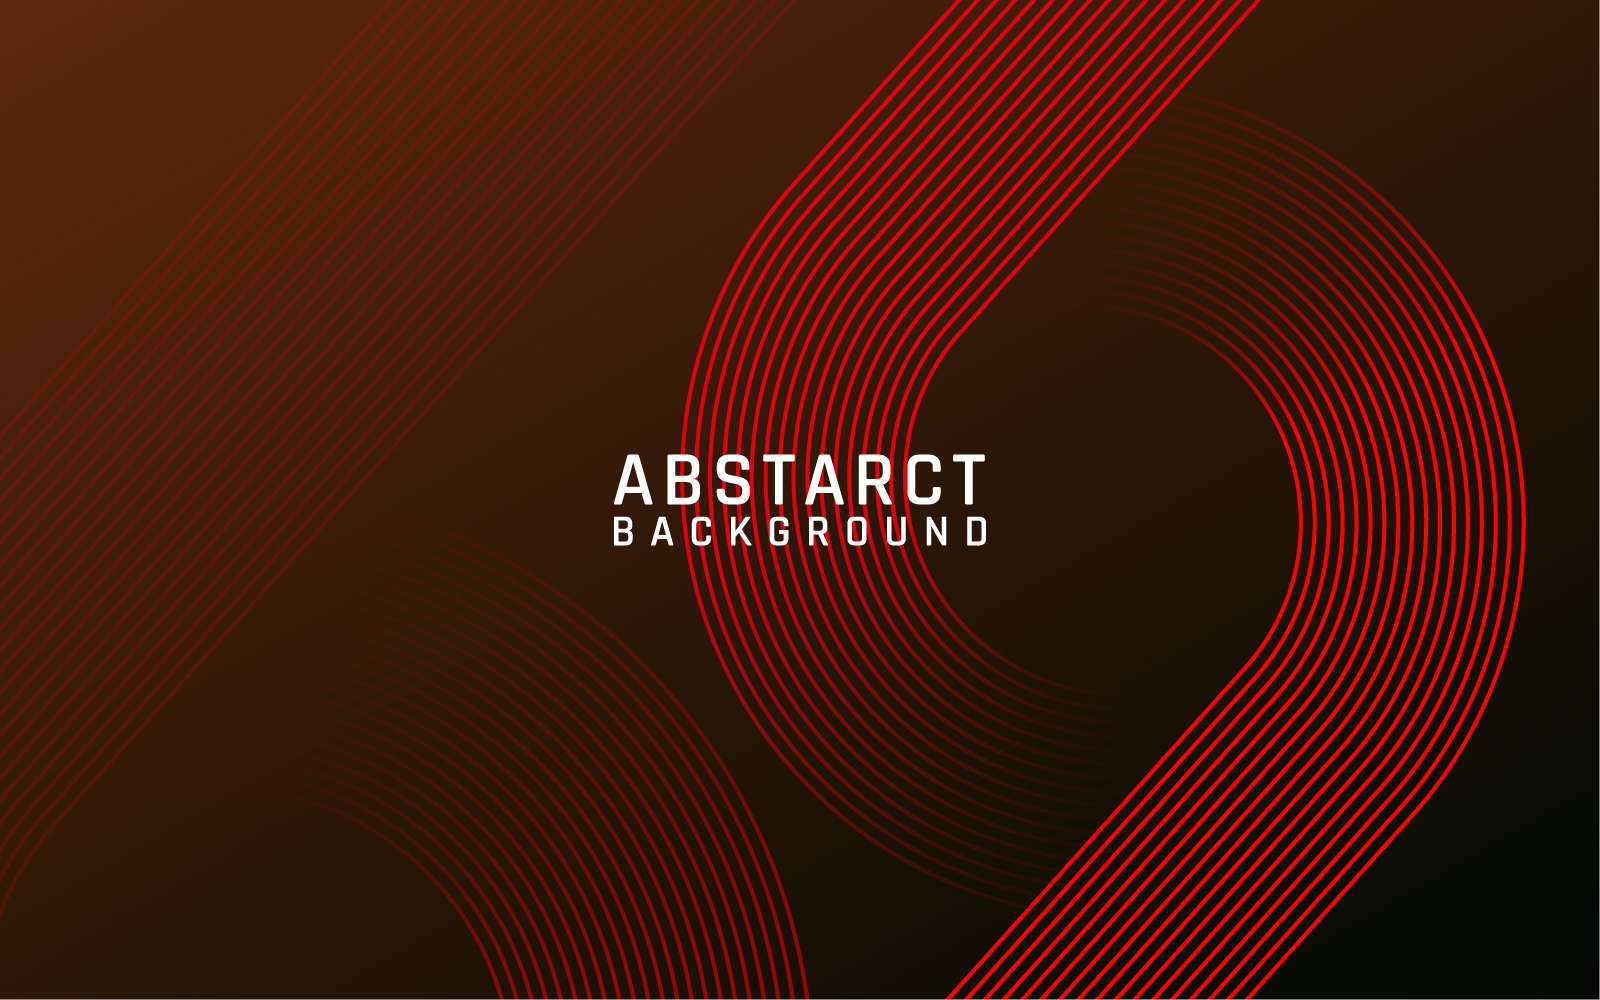 Abstract Technology line backgrounds